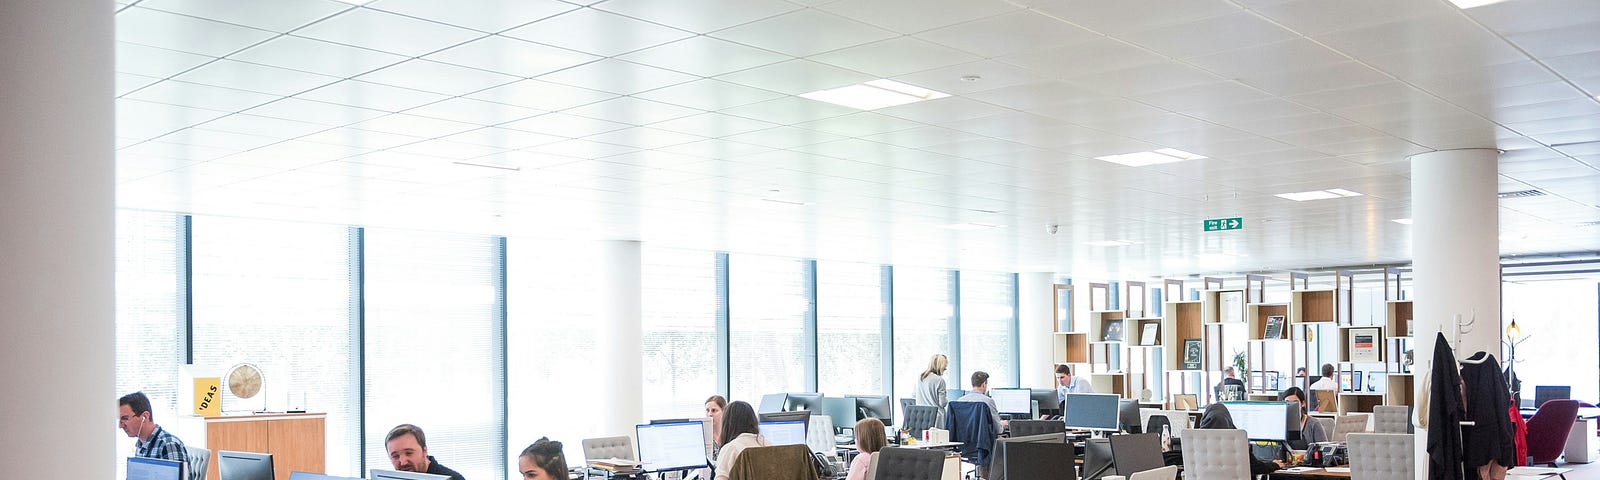 A photo shows a modern corporate workplace with employees working behind desks